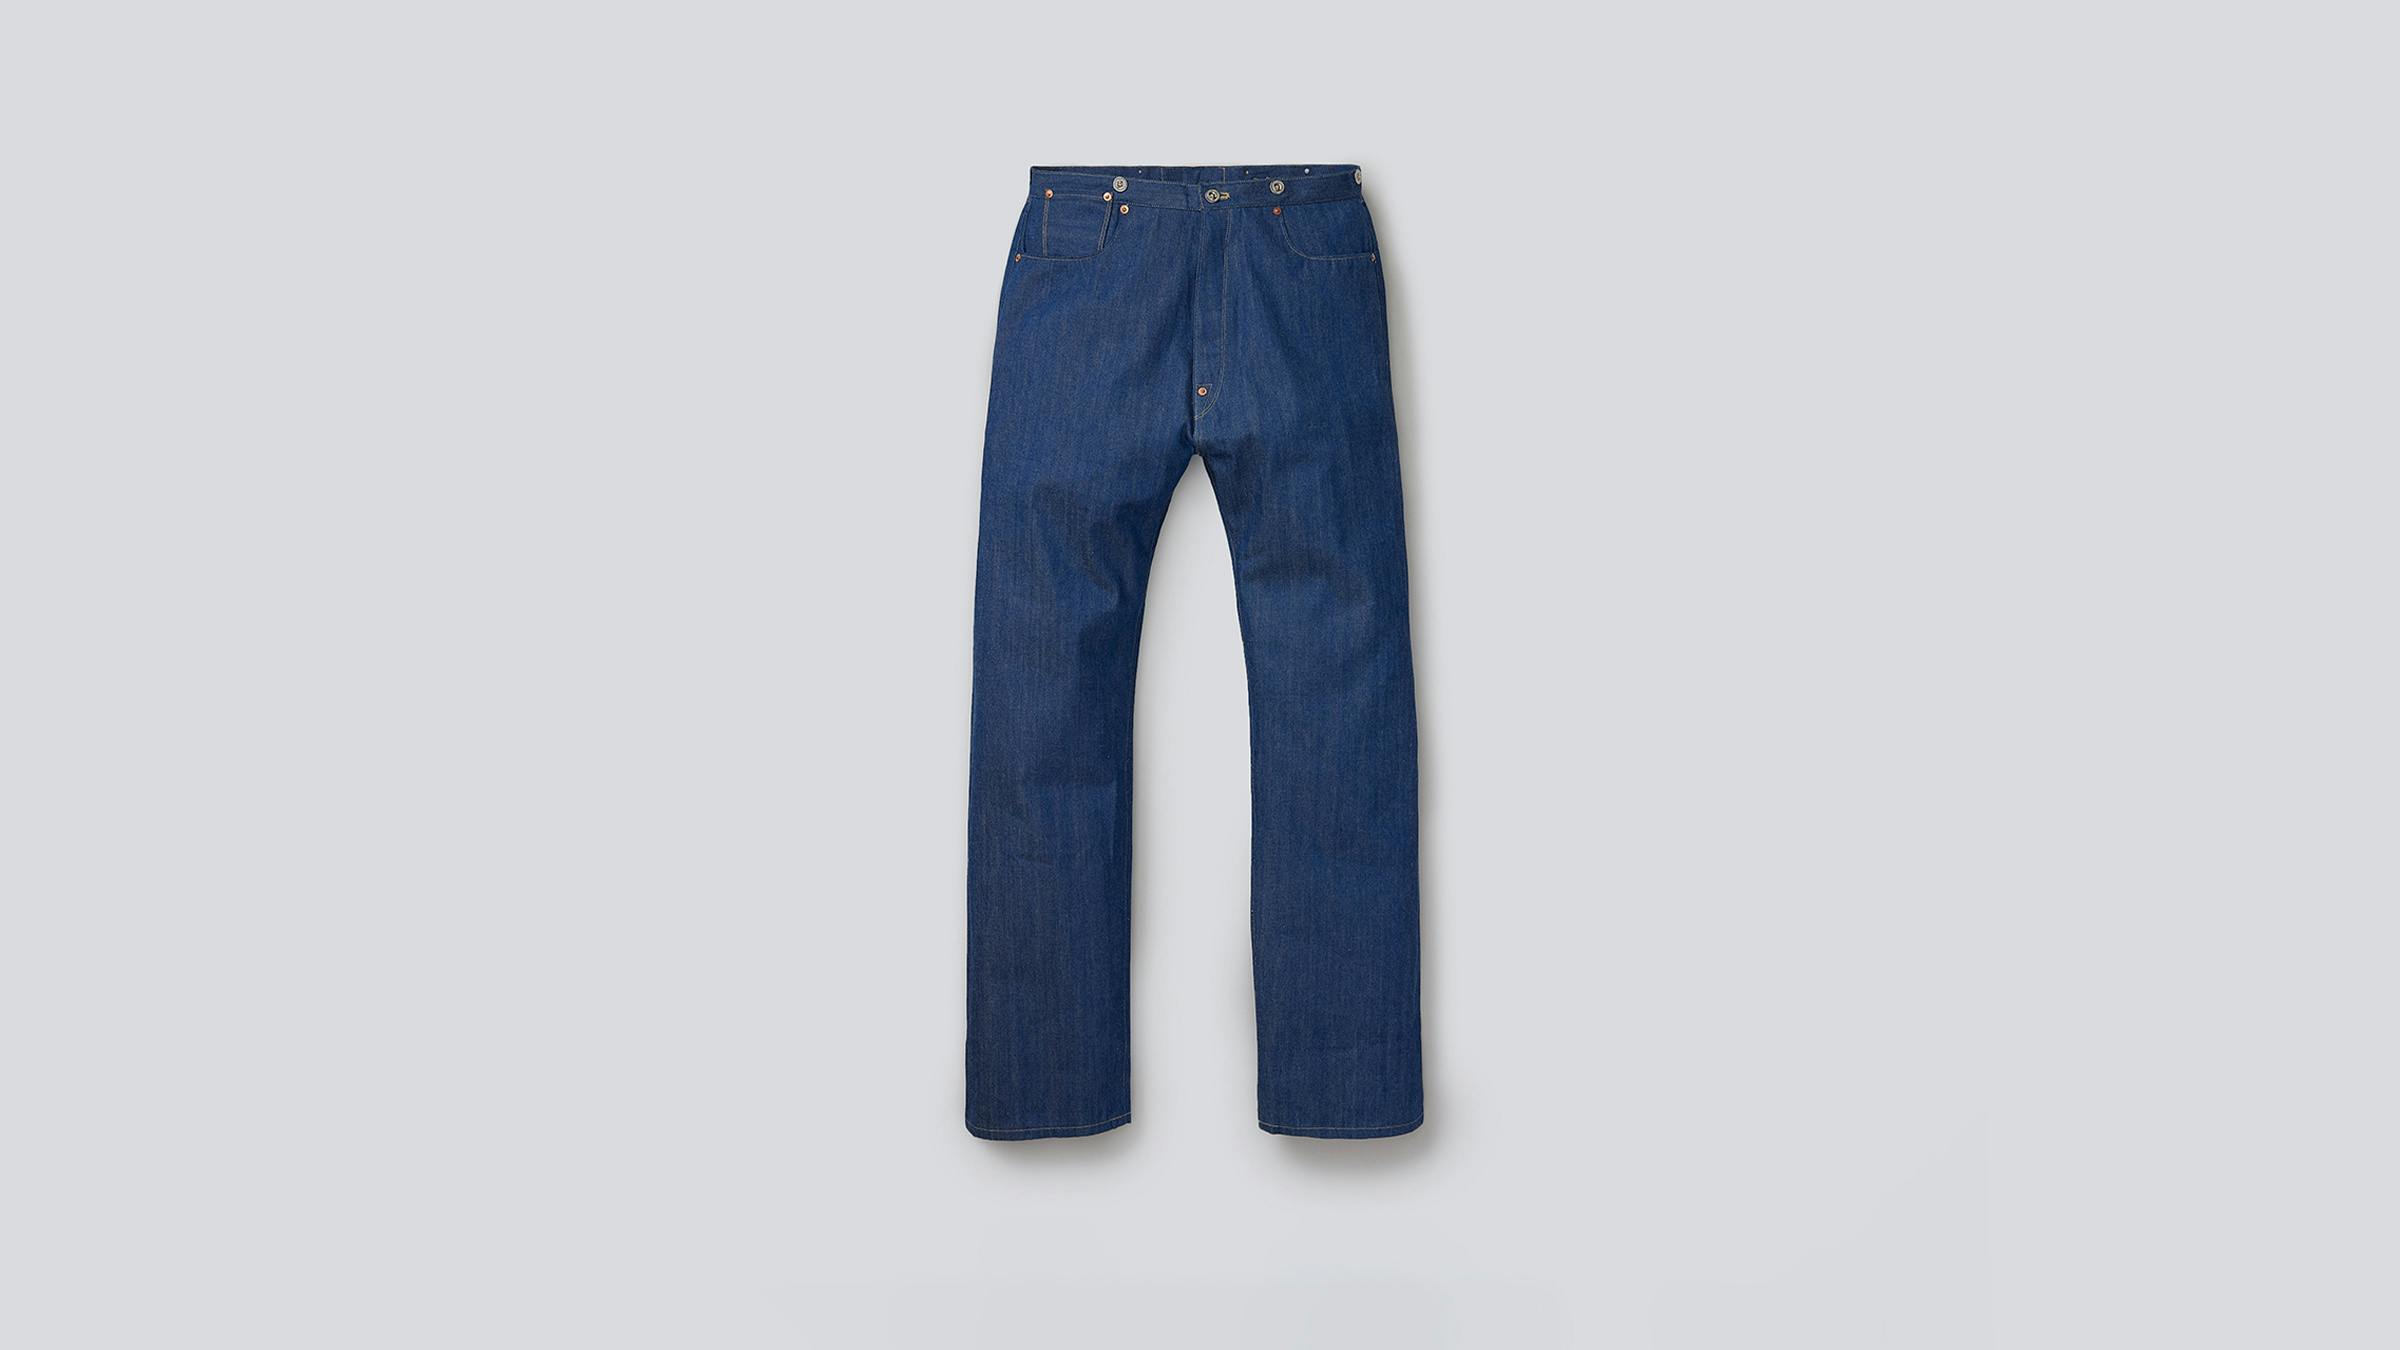 LEVIS VINTAGE CLOTHING LIMITED EDITION 1873 XX OVERALL — LEVI'S® FIRST BLUE JEAN | END.